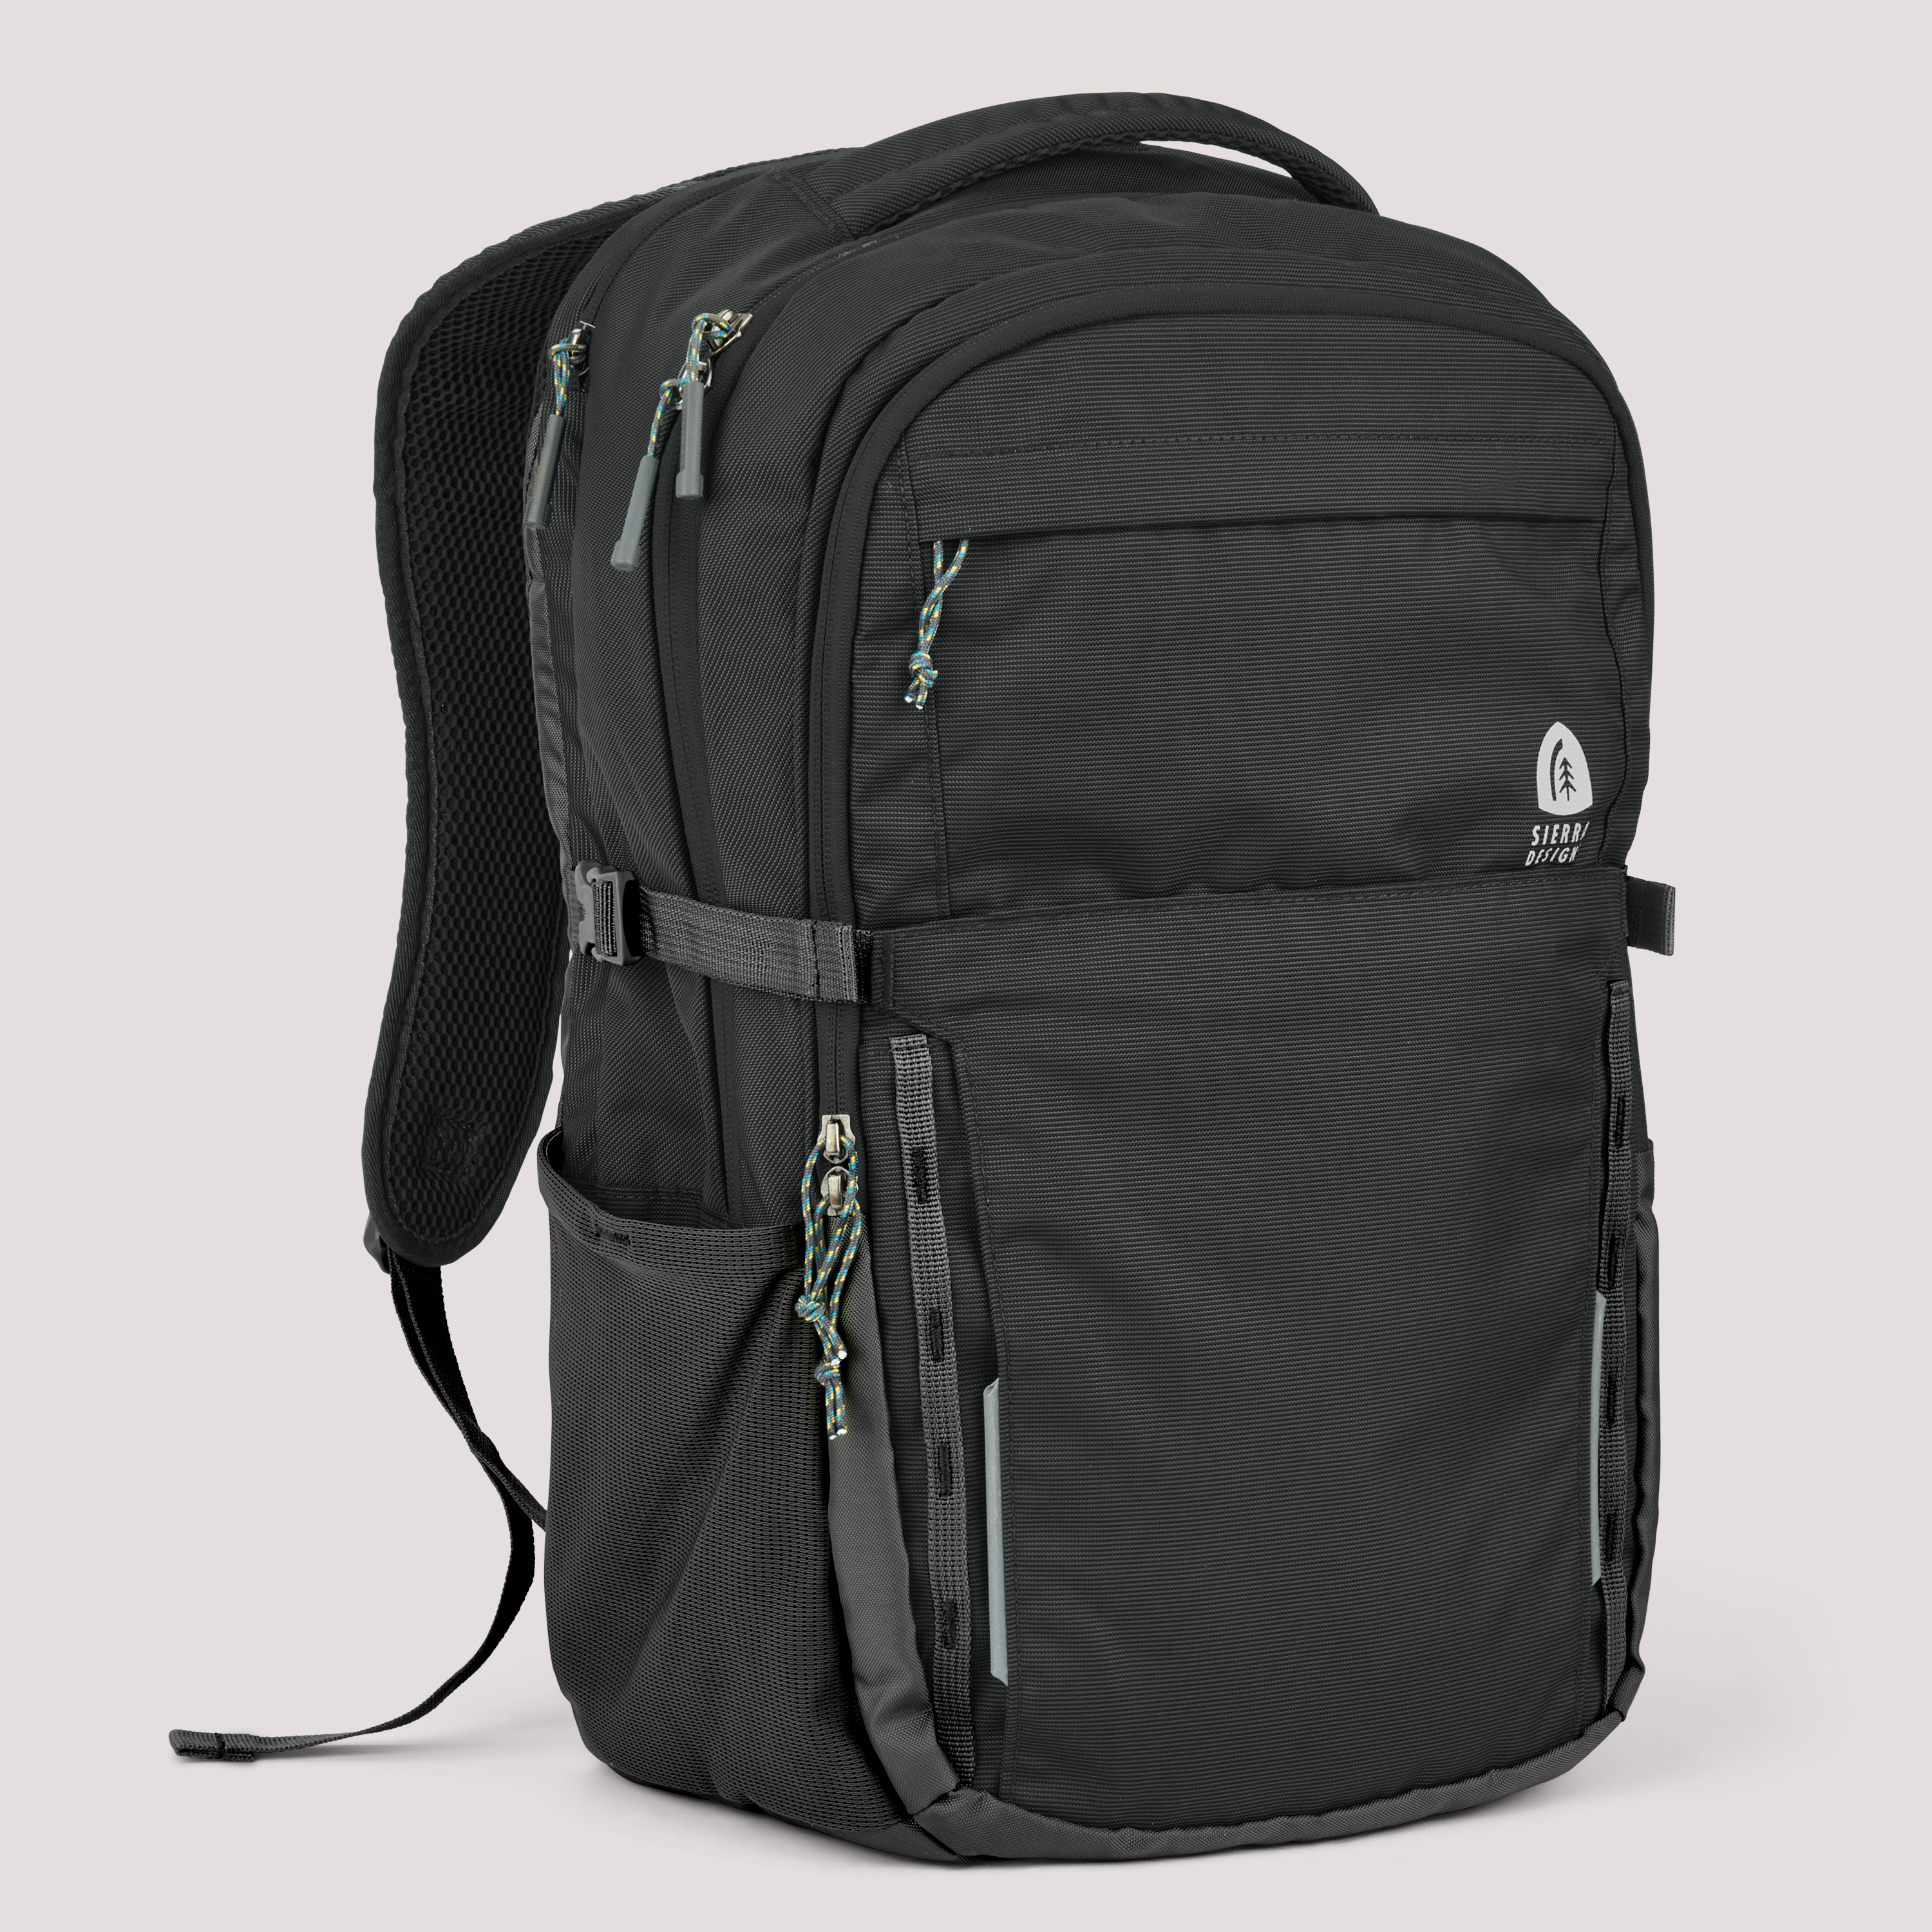 Sierra Designs Monitor Pass Daypack, front view 